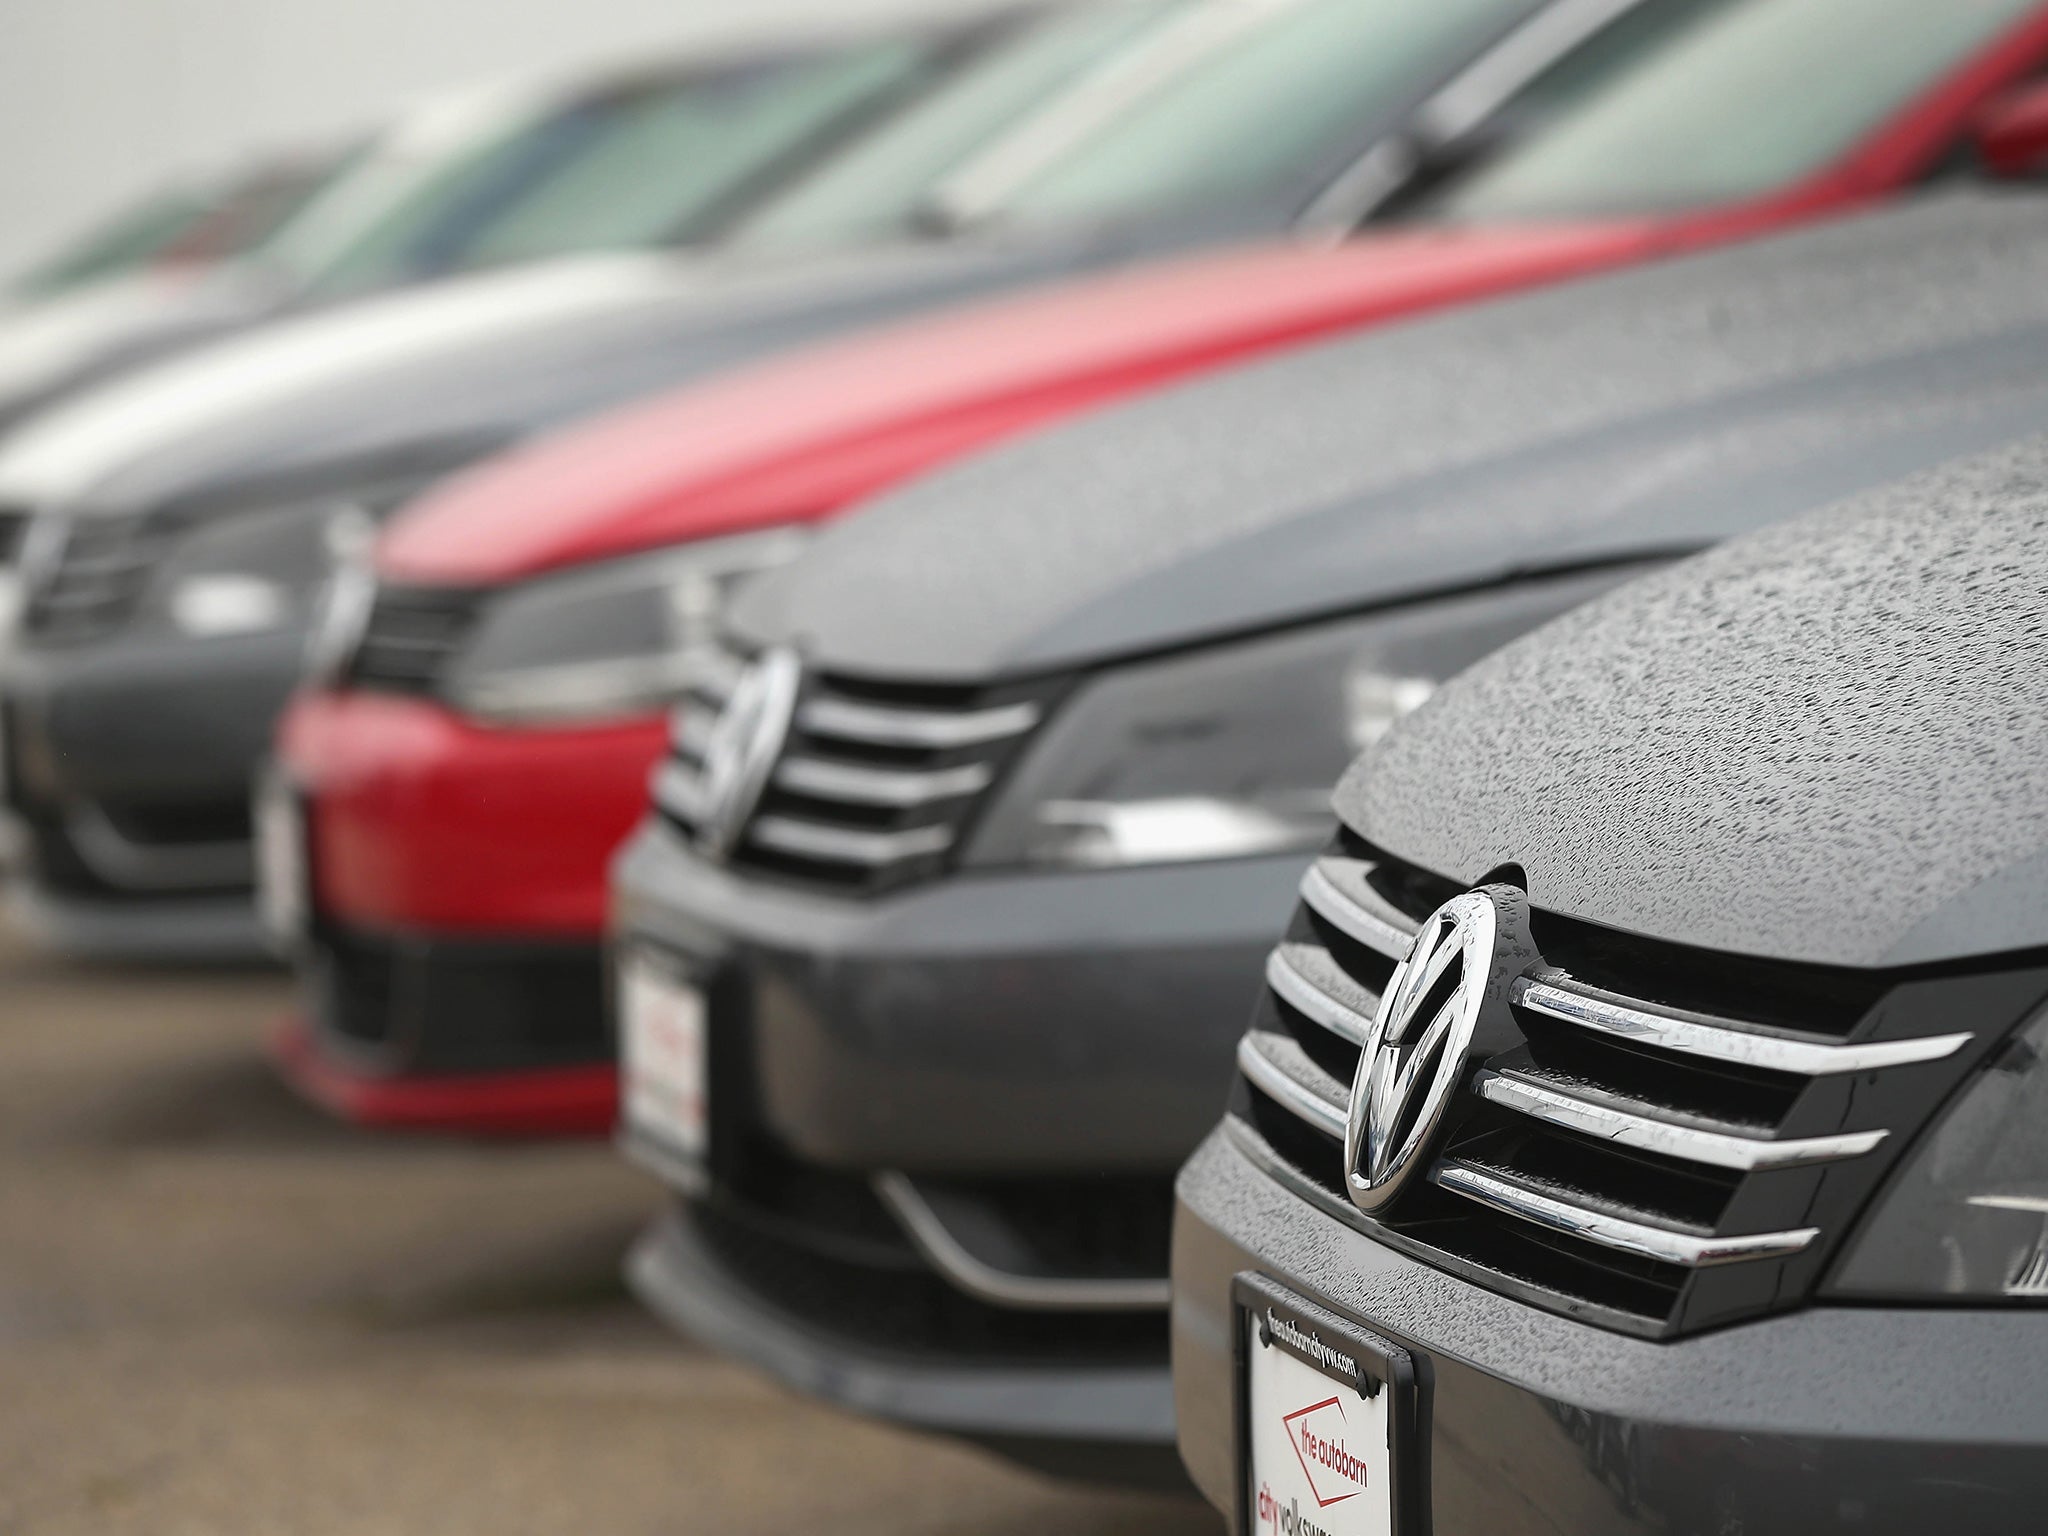 Almost 1.2 million VW-made cars are being recalled in the UK